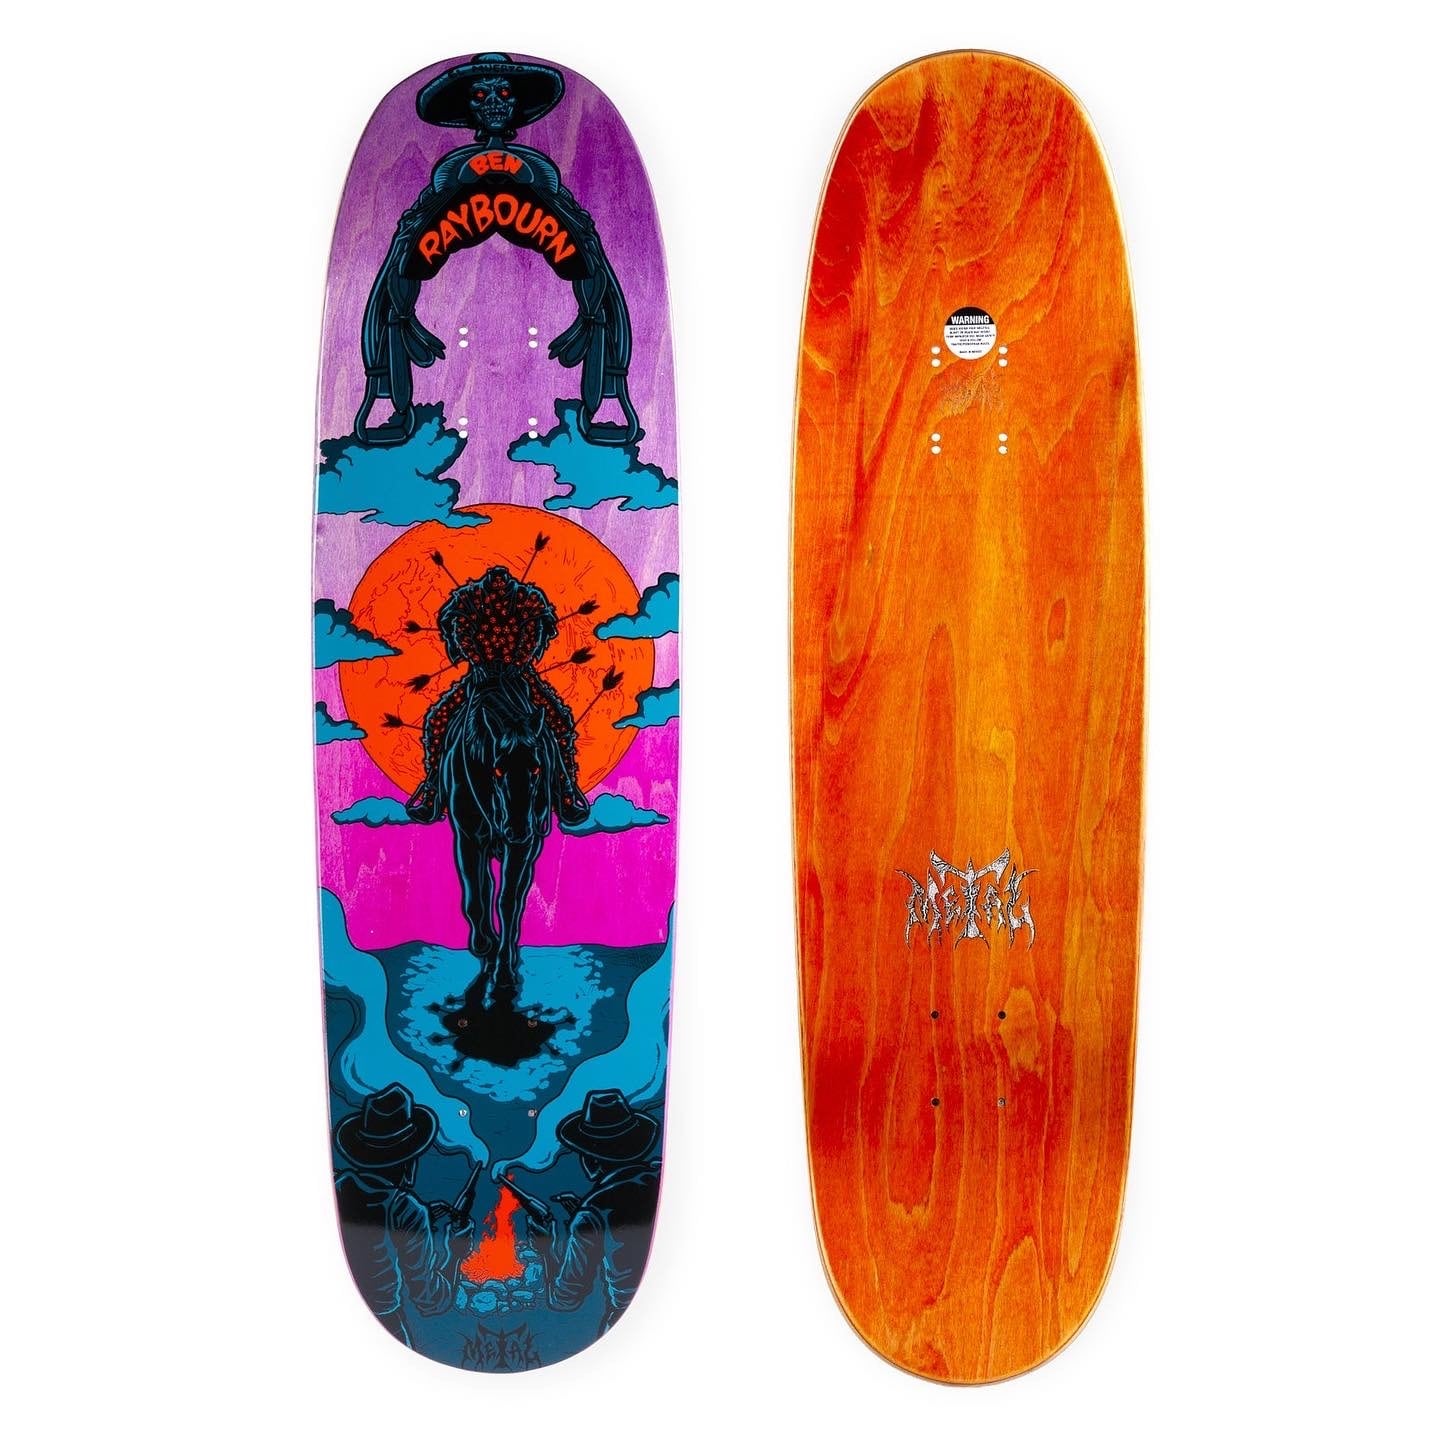 METAL SKATEBOARDS / RAYBOURN EL MUERTO 8.75 | youth powered by BASE